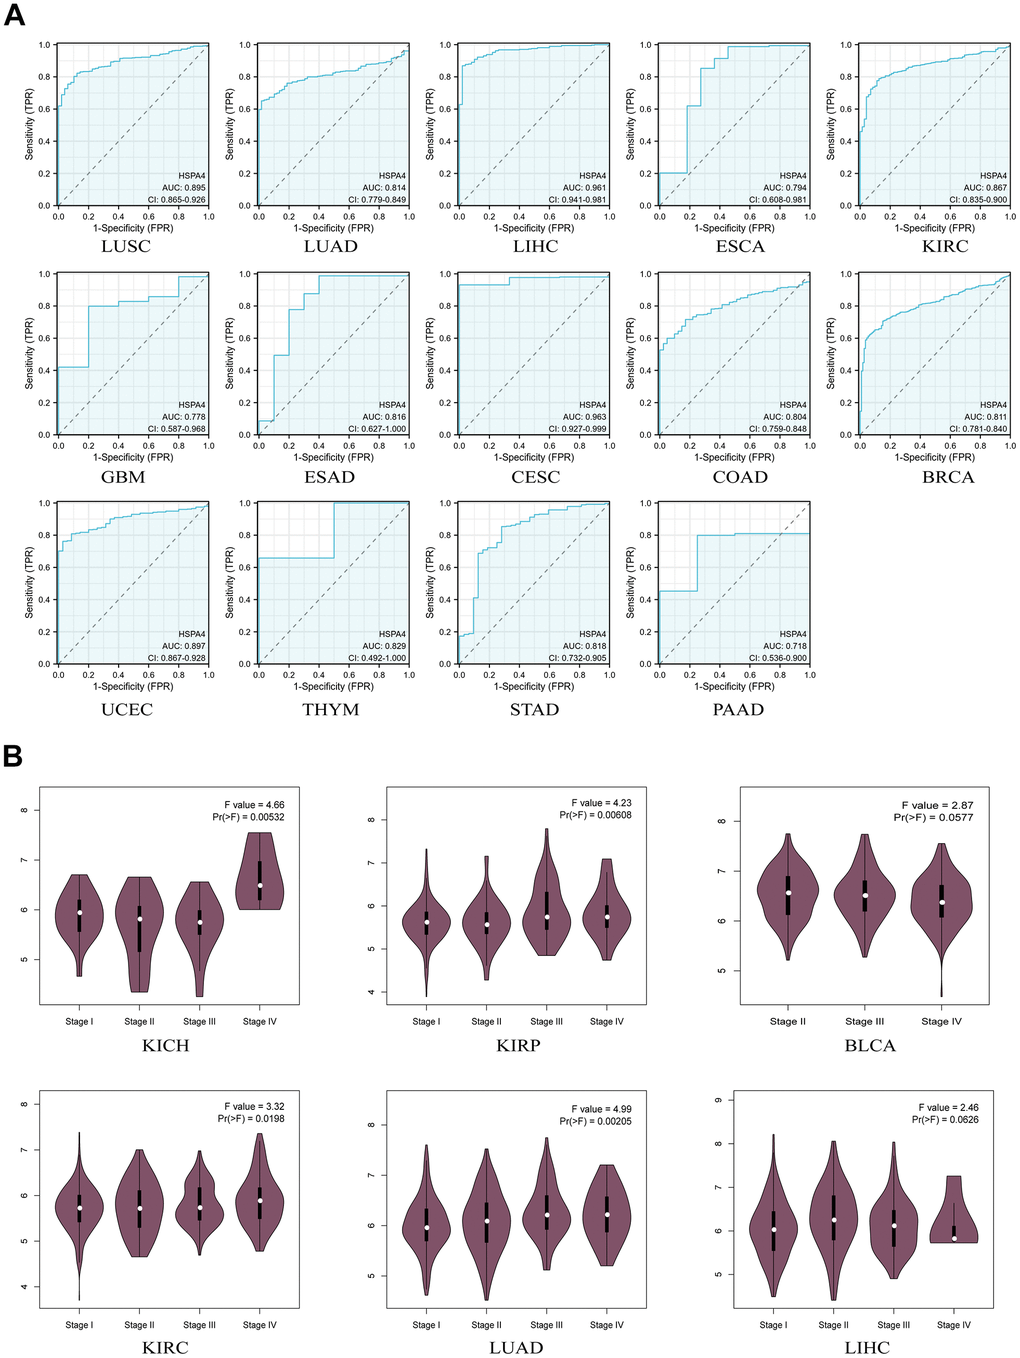 Diagnostic value of HSPA4 in pan-cancer. (A) ROC curve of HSPA4 in 14 types of cancers. (B) Based on the TCGA data, the expression levels of the HSPA4 gene were analyzed by the main pathological stages (stage I, stage II, stage III, and stage IV) of KICH, KIRP, BLCA, KIRC, LUAD, LIHC. Log2 (TPM+1) was applied for log-scale.